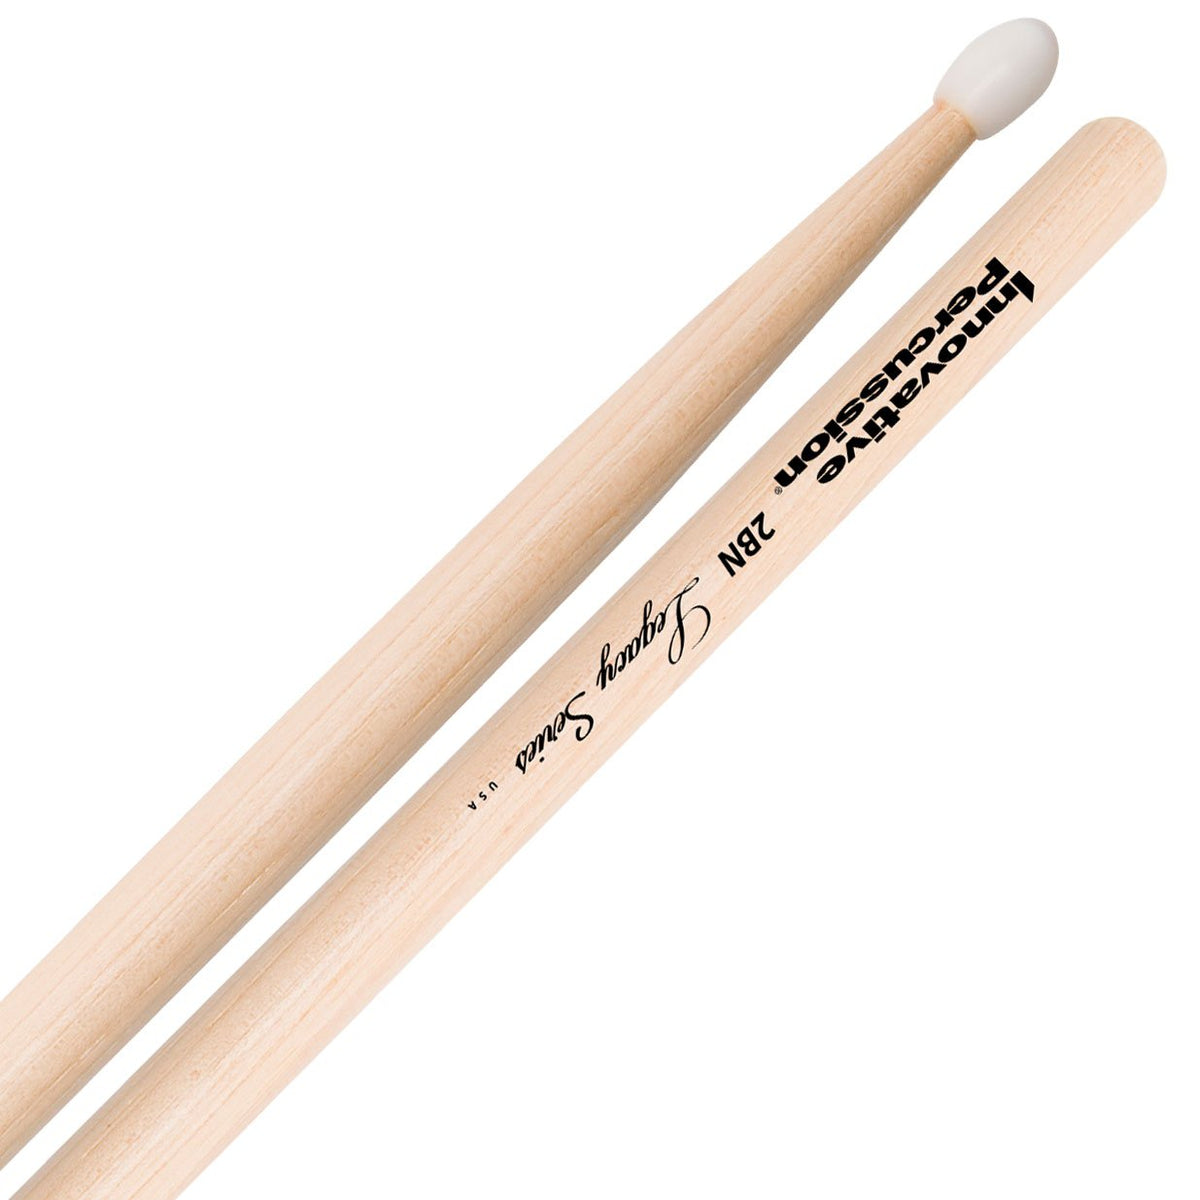 Innovative Percussion - Legacy Series Drumset Drumsticks